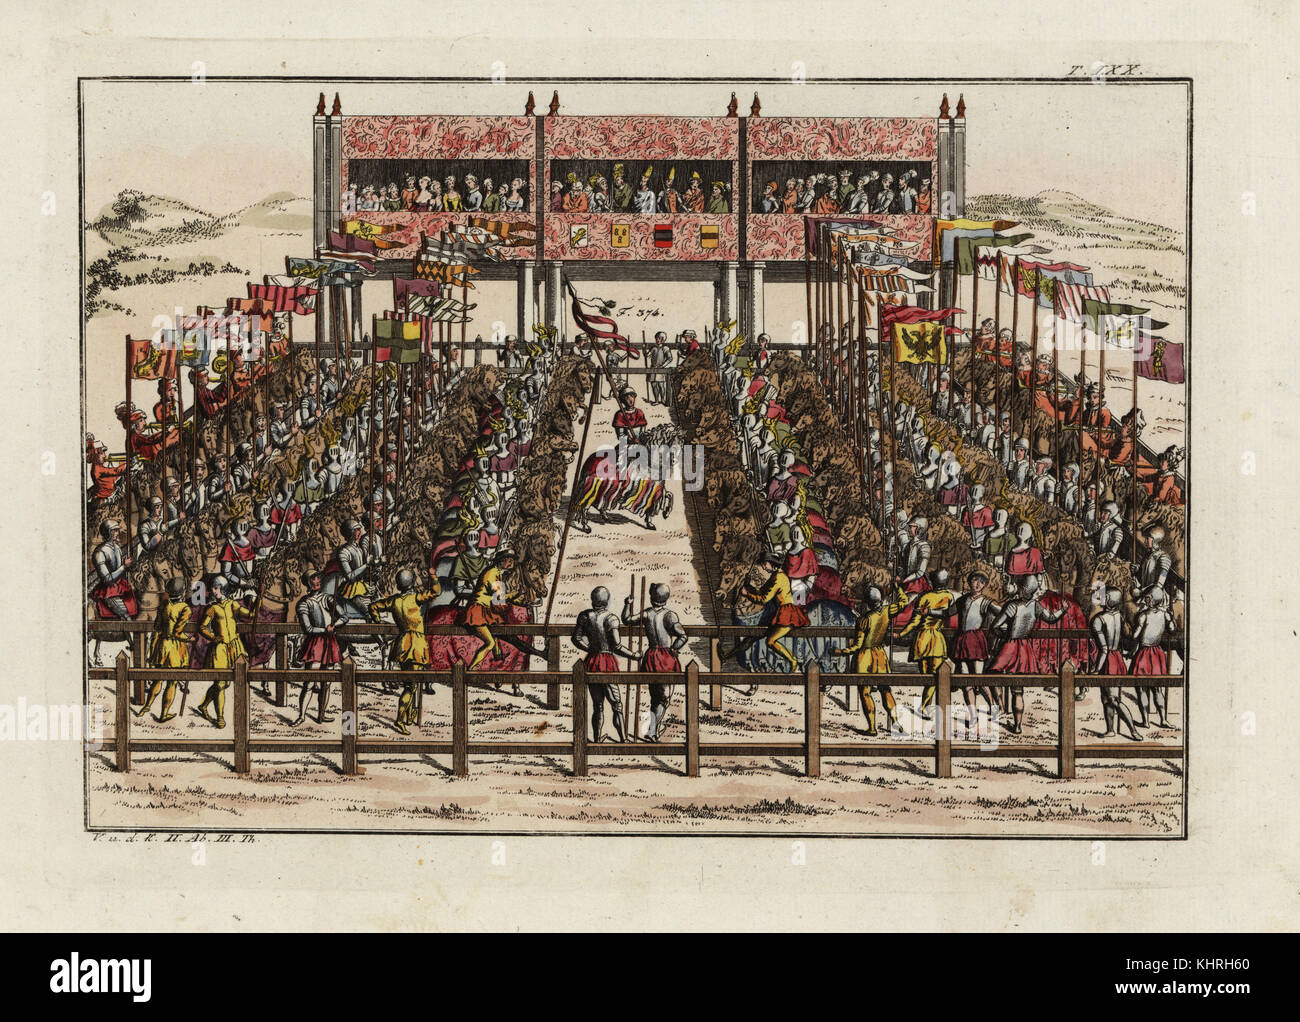 The knights gather for an enclosed-field tournament or melee for King Rene of Anjou, 15th Century. Knights on horseback face off within an enclosure before royal spectators. From Marc Vulson de la Colombiere's Le Vrai Theatre d'Honneur et de chevalerie, 1648. Handcoloured copperplate engraving from Robert von Spalart's Historical Picture of the Costumes of the Principal People of Antiquity and of the Middle Ages, Chez Collignon, Metz, 1810. Stock Photo